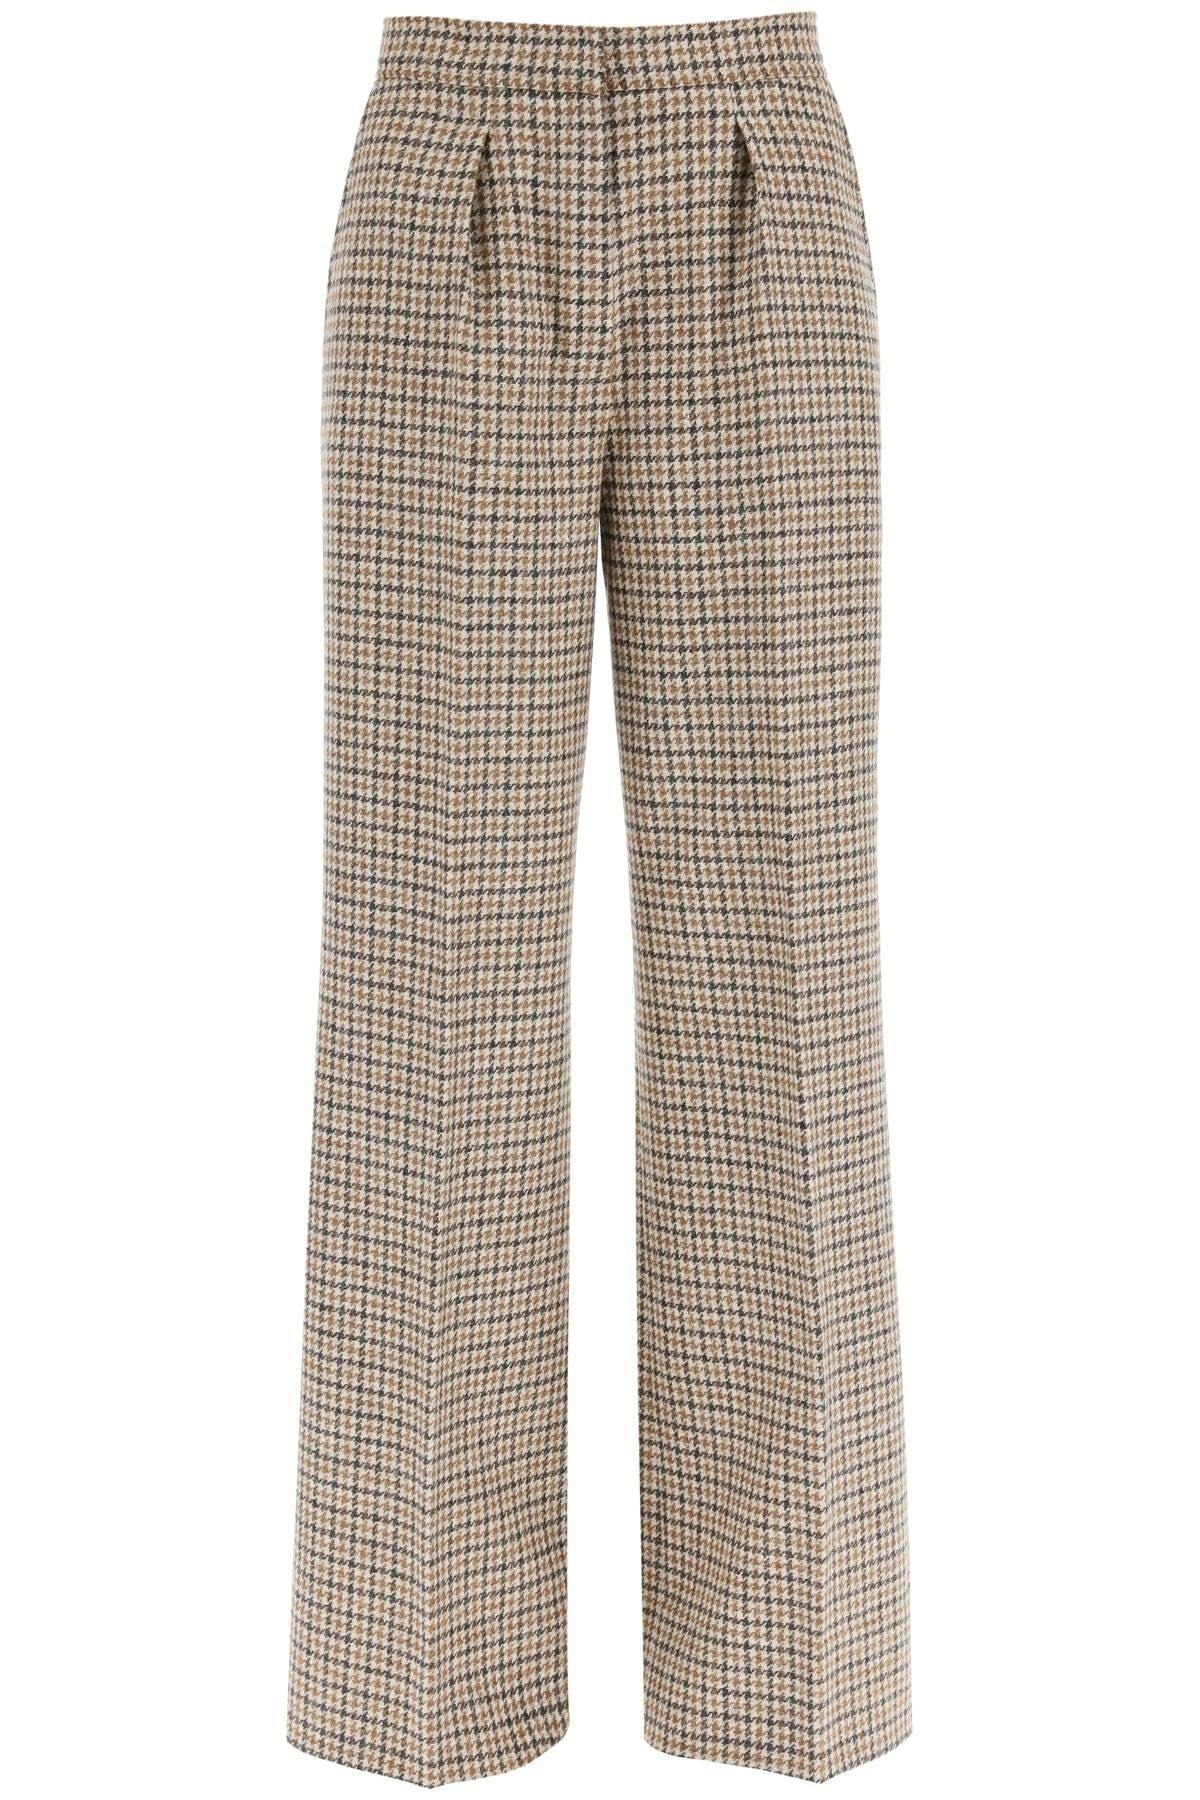 Palm Angels Classic Suit Trousers In Checked Wool in Natural | Lyst